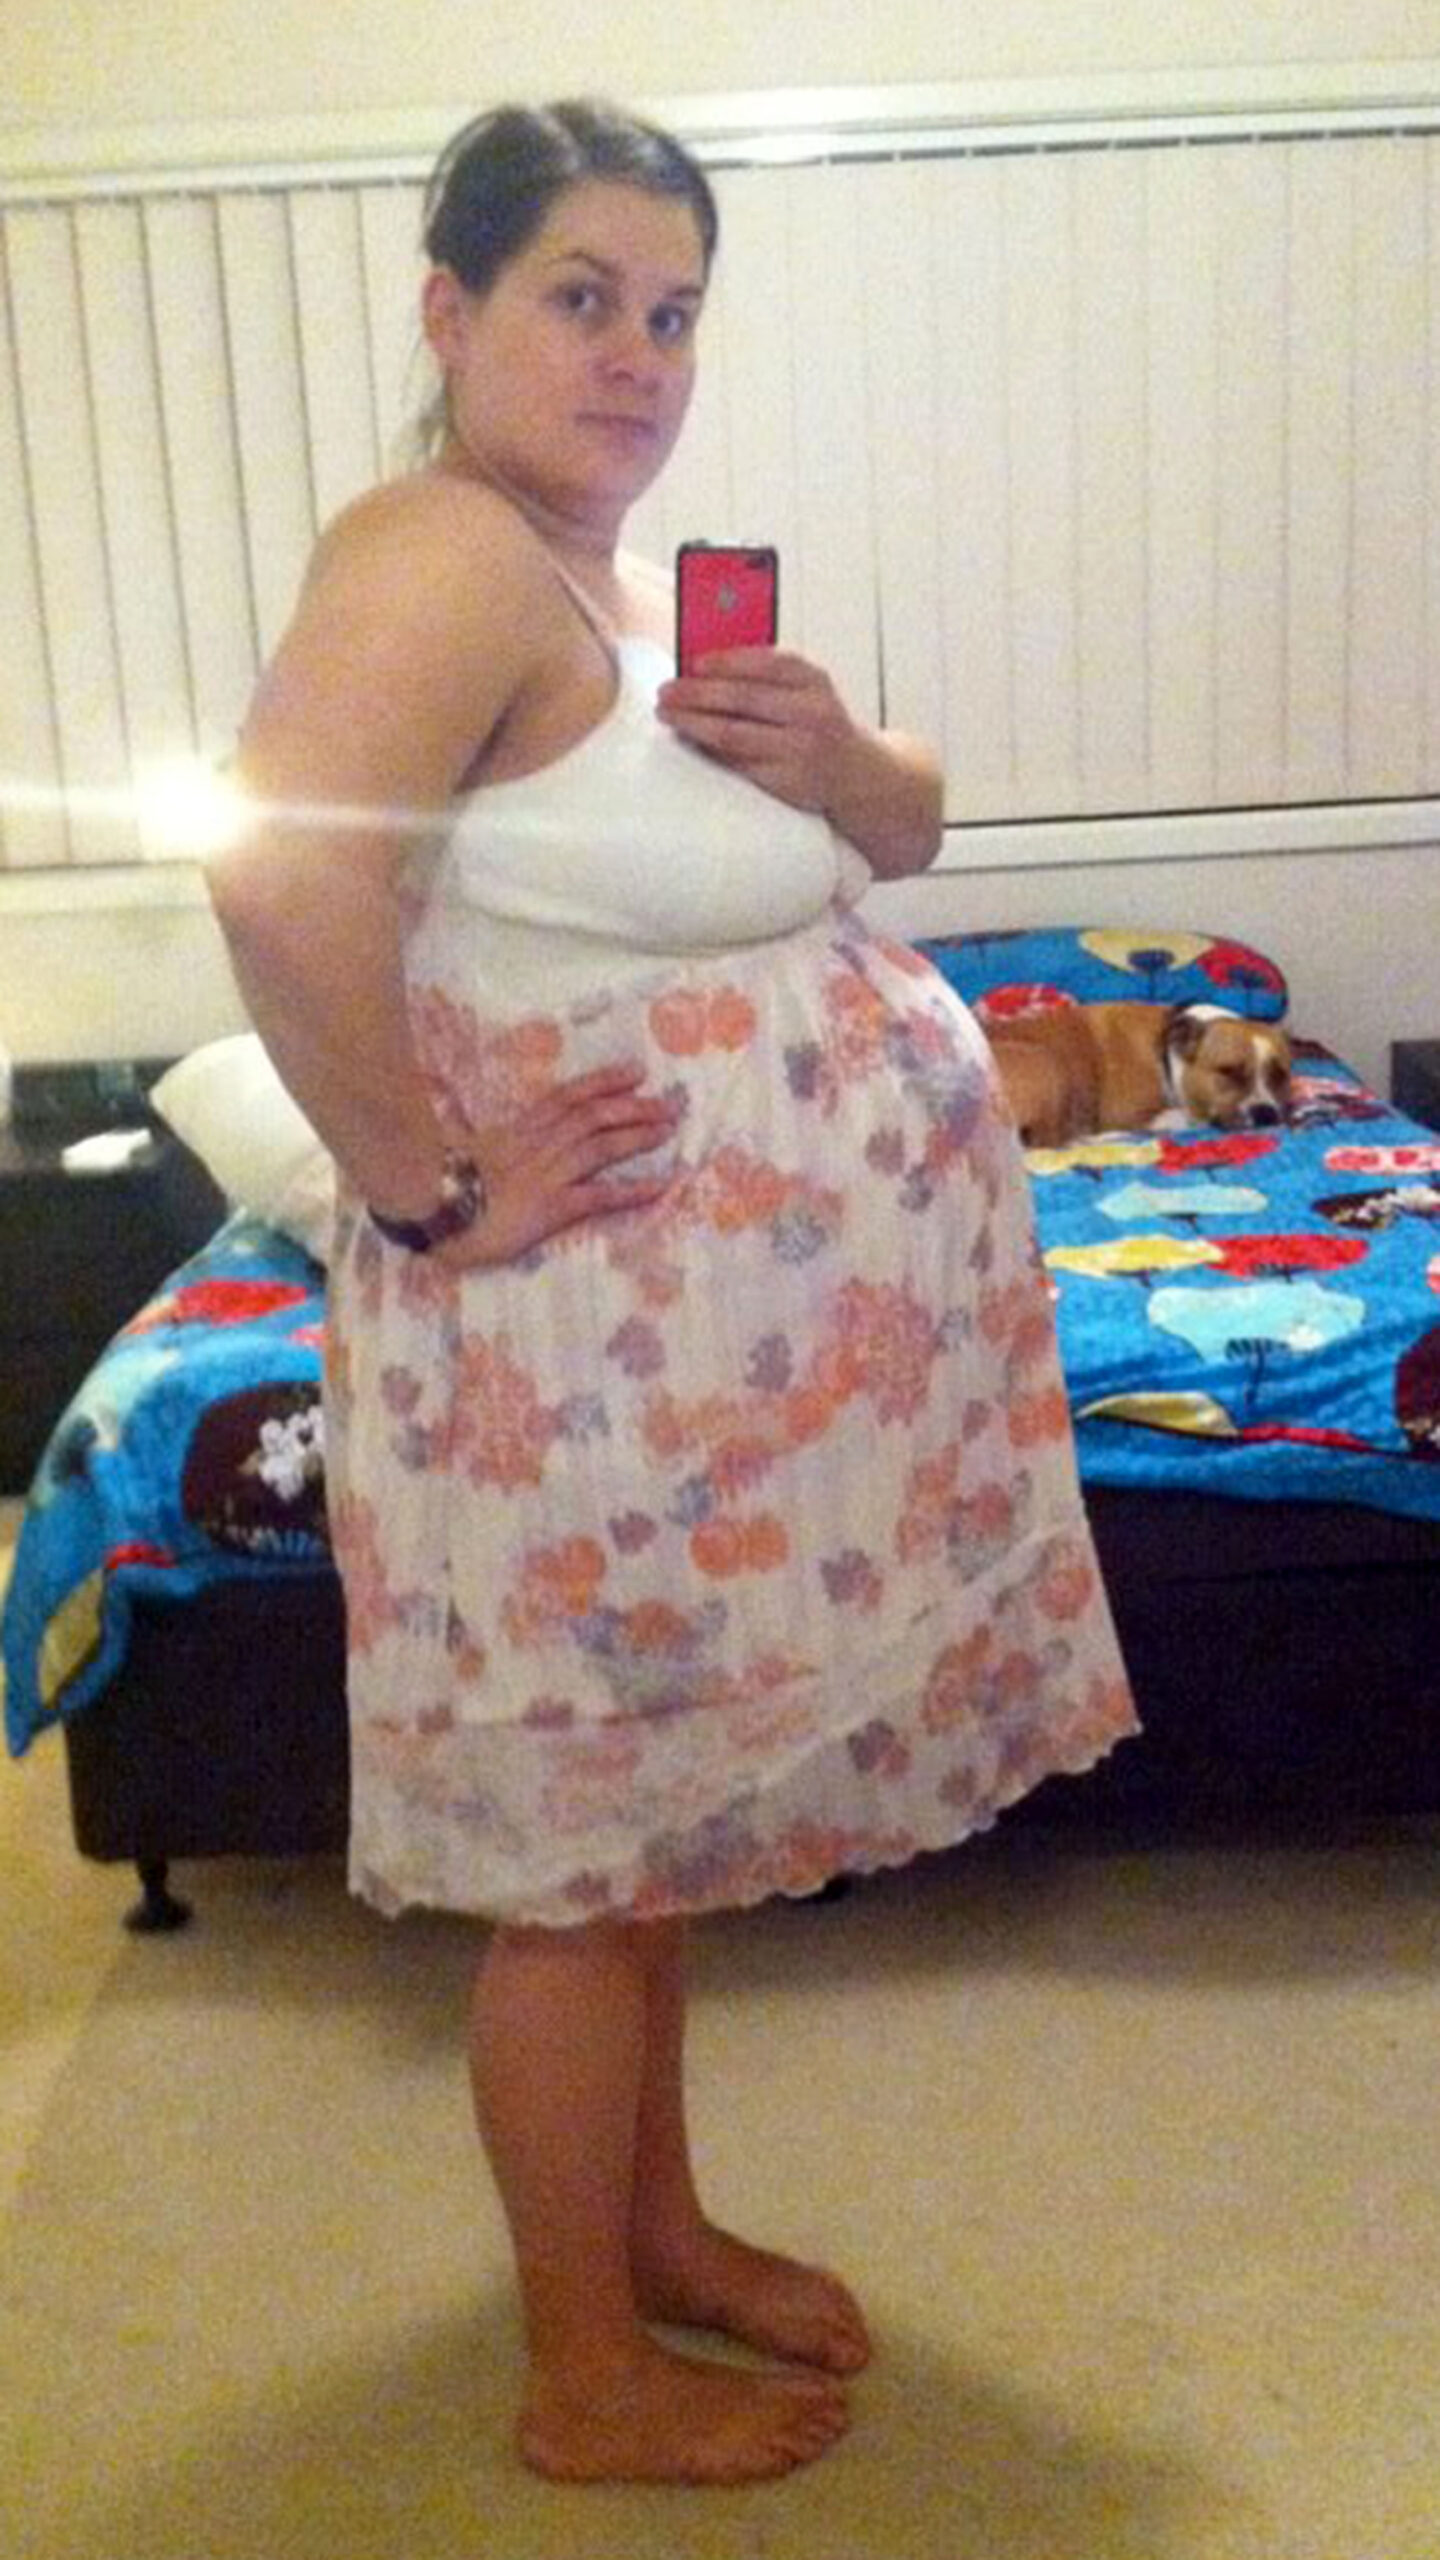 Perth woman loses 56kg after being fat shamed in Bali